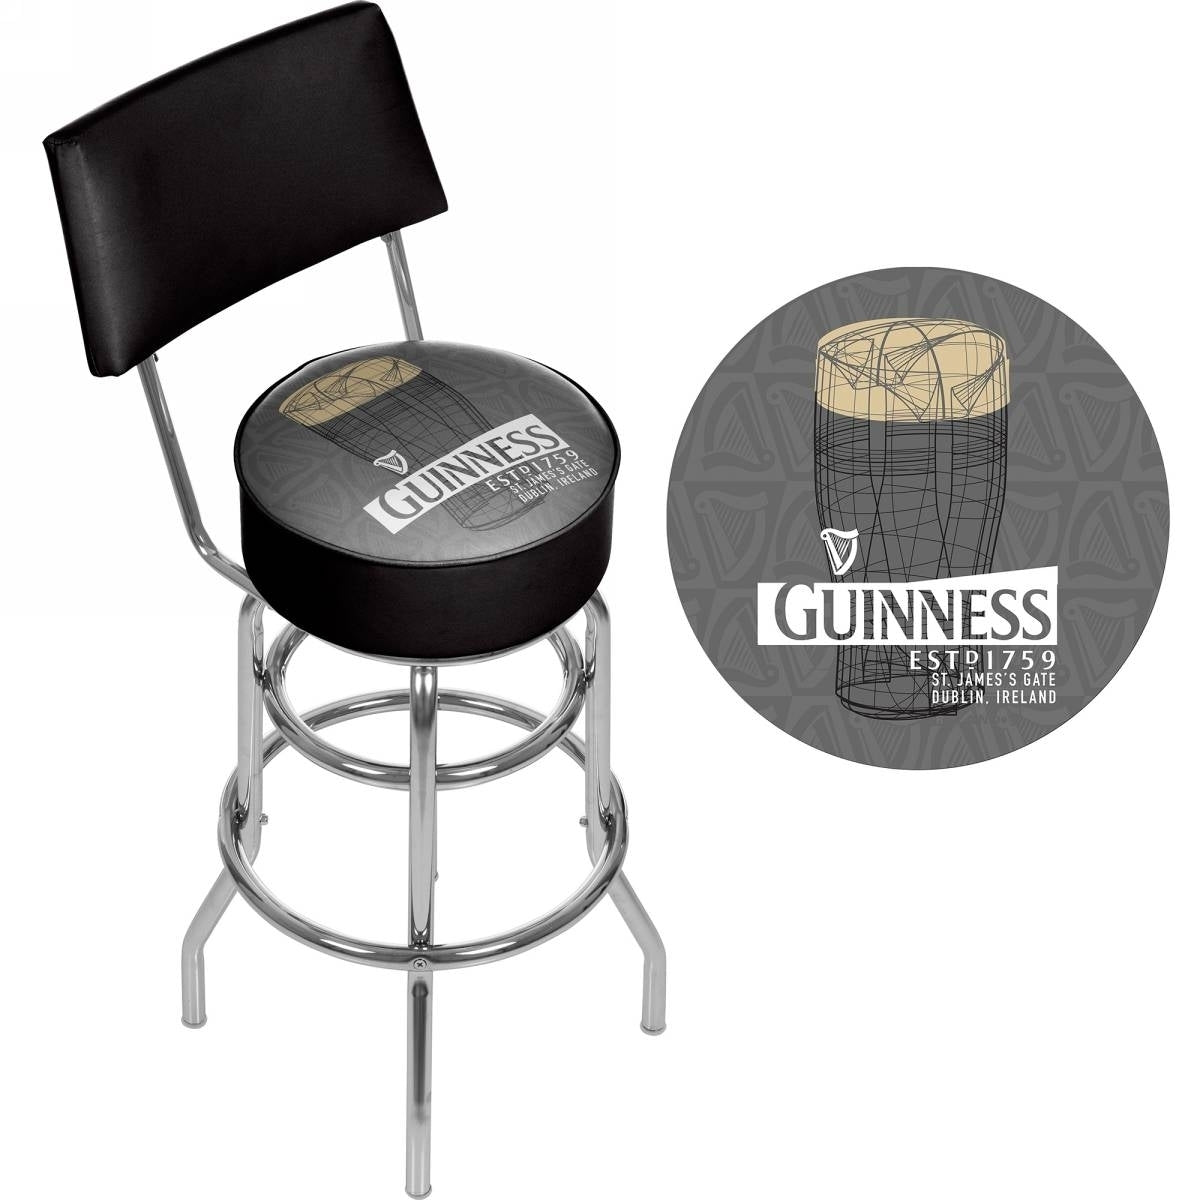 Product Description: This Guinness Swivel Bar Stool with Back - Line Art Pint is the perfect addition to any home or establishment. With its swivel function, it allows for easy movement and comfort. The stool features a classic black design with the Guinness branding.
Brand Name: Guinness